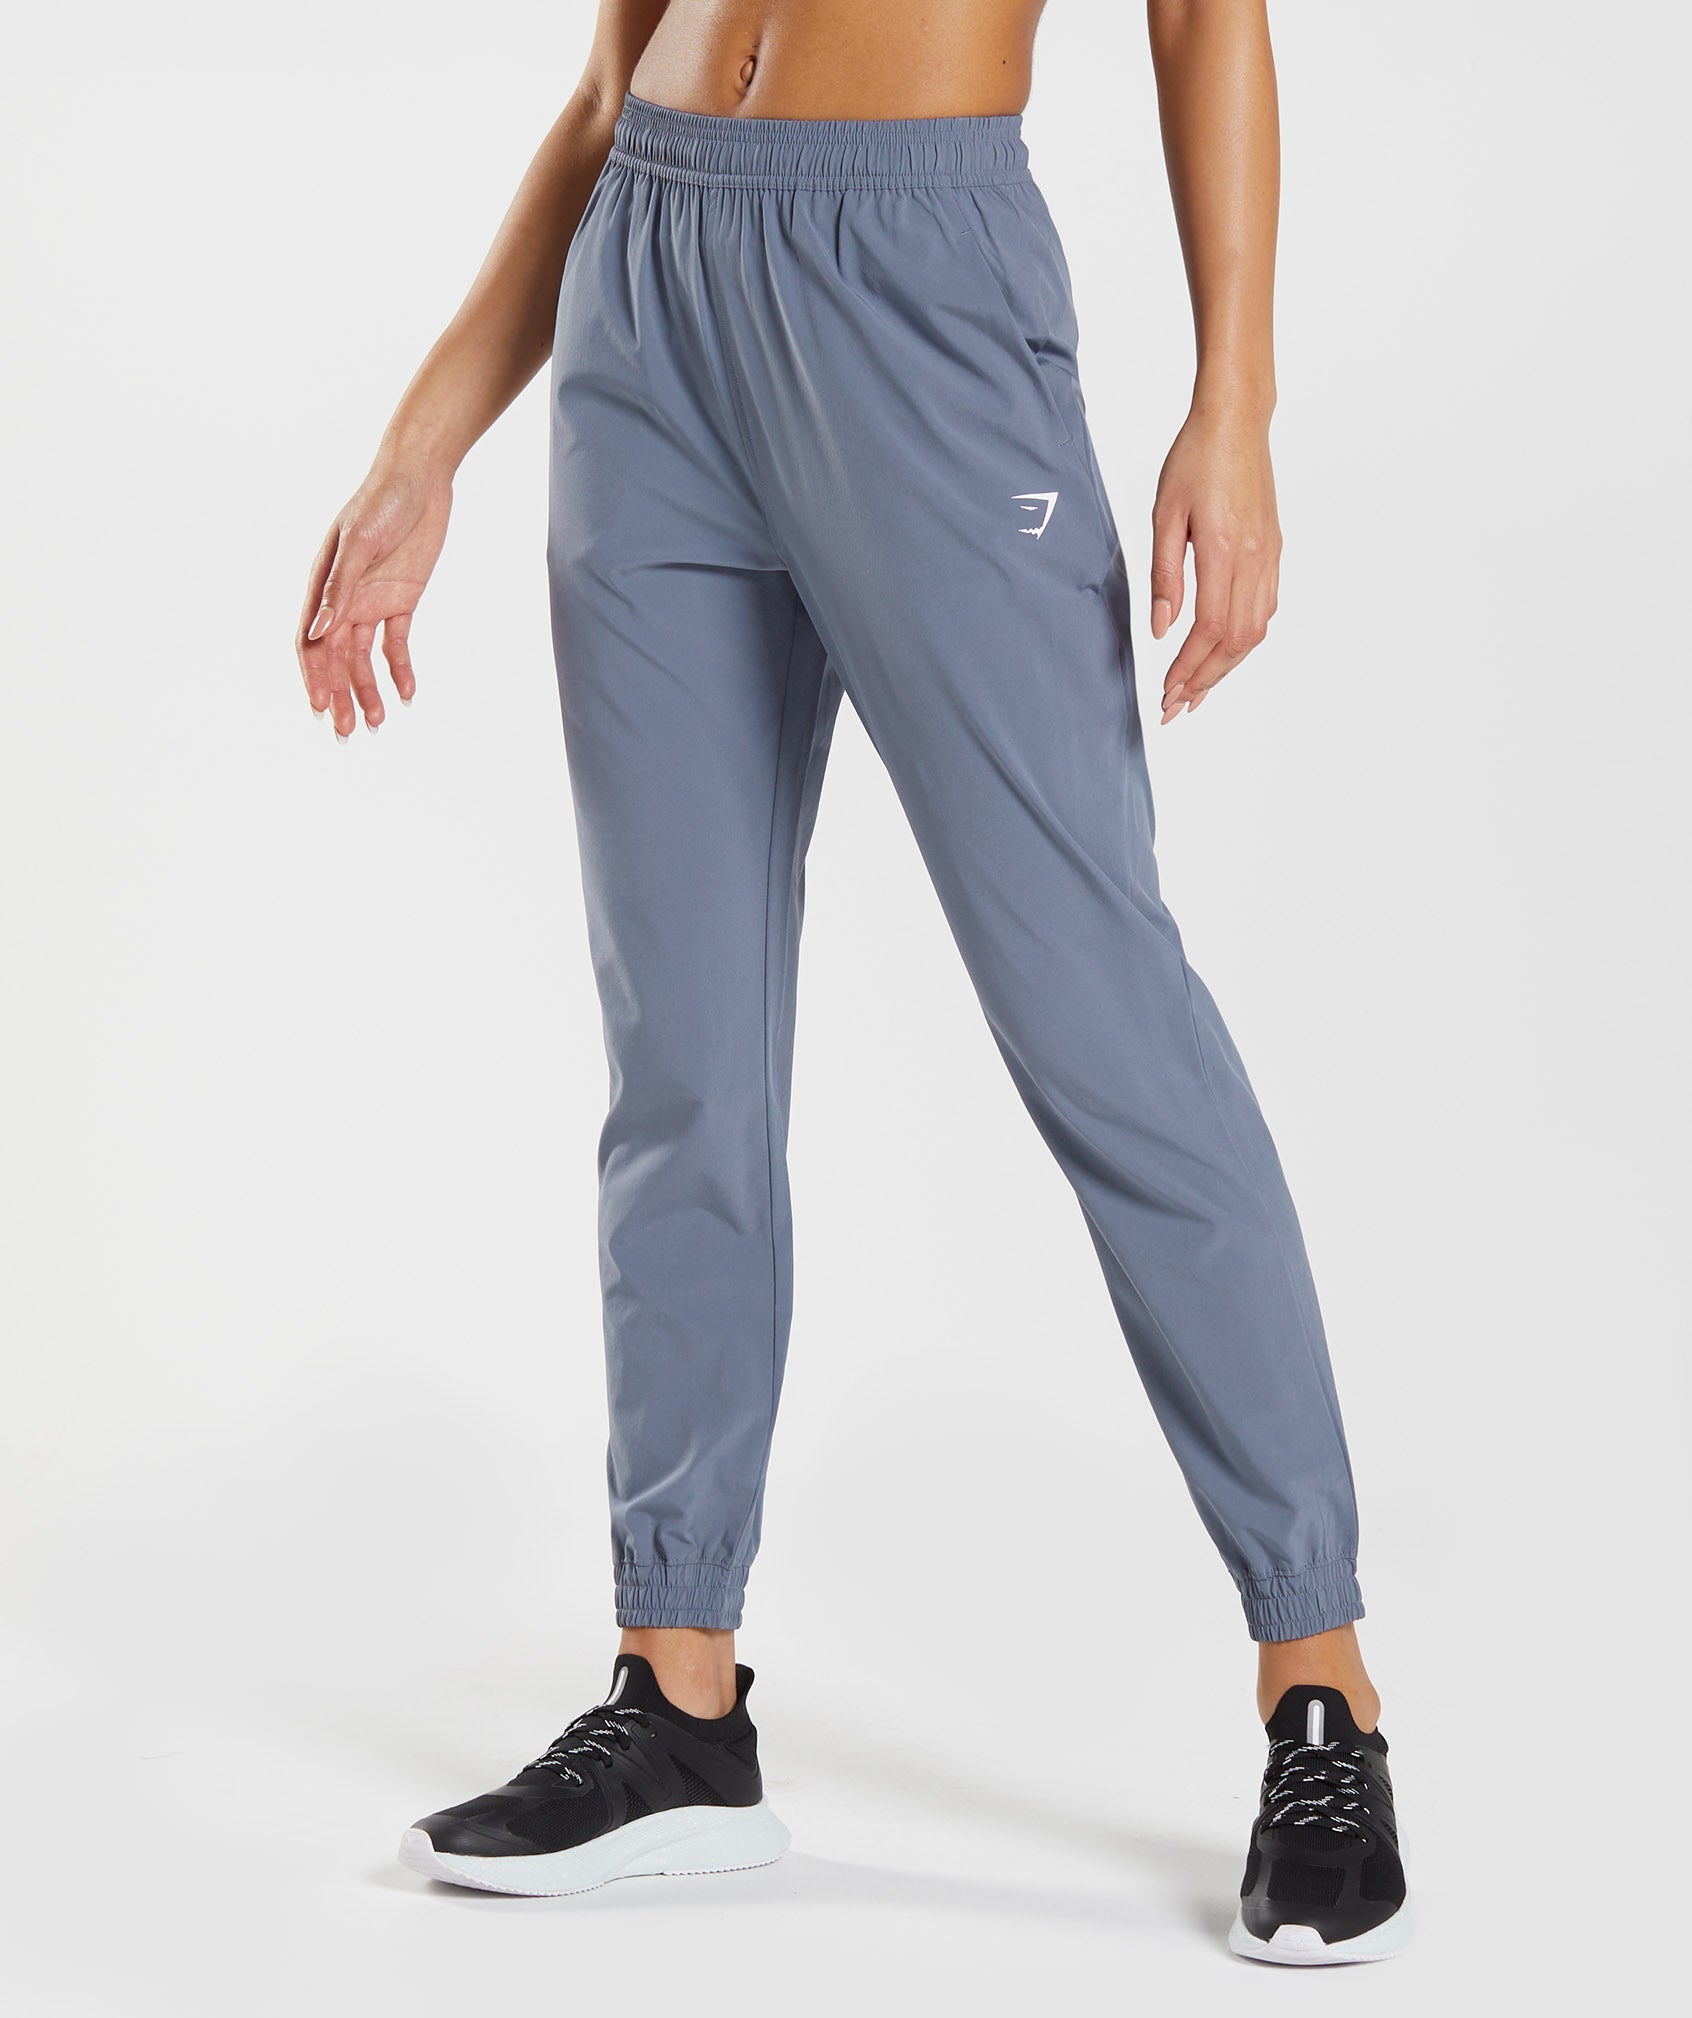 Gymshark Women's Black Training Jogger, Small for Sale in Manalapan  Township, NJ - OfferUp